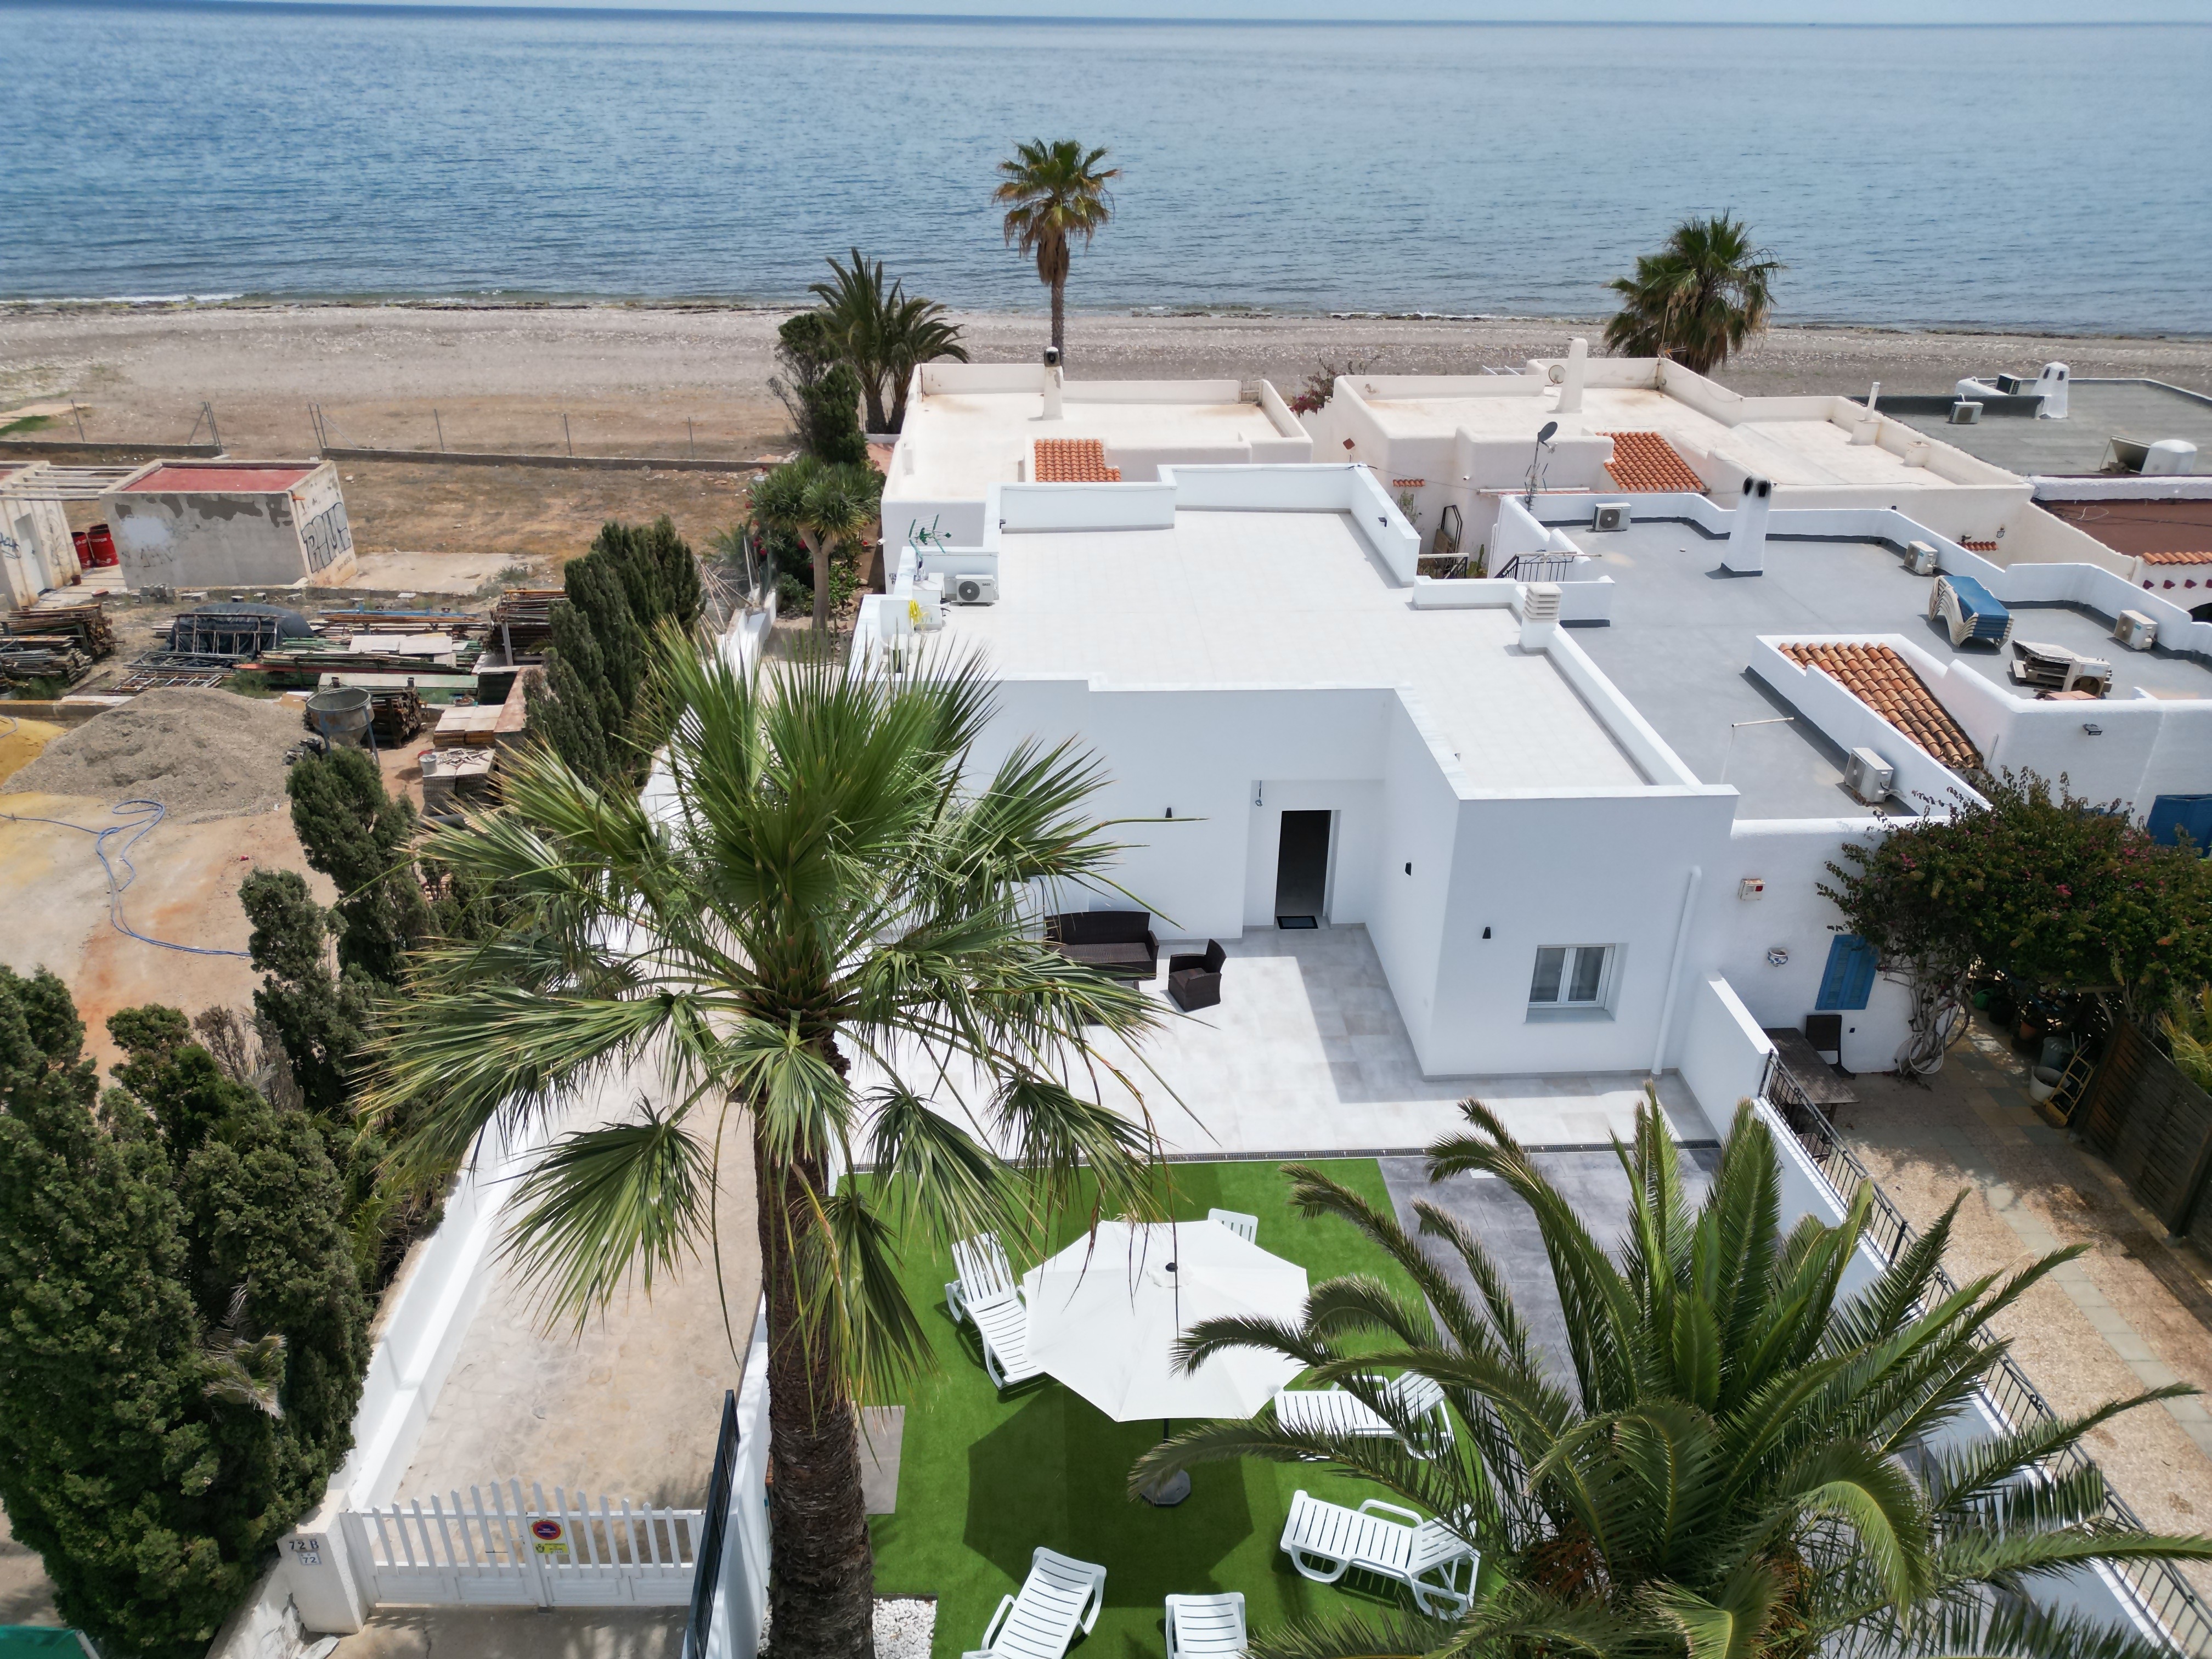 Villa located in Mojacar, few steps from the beach